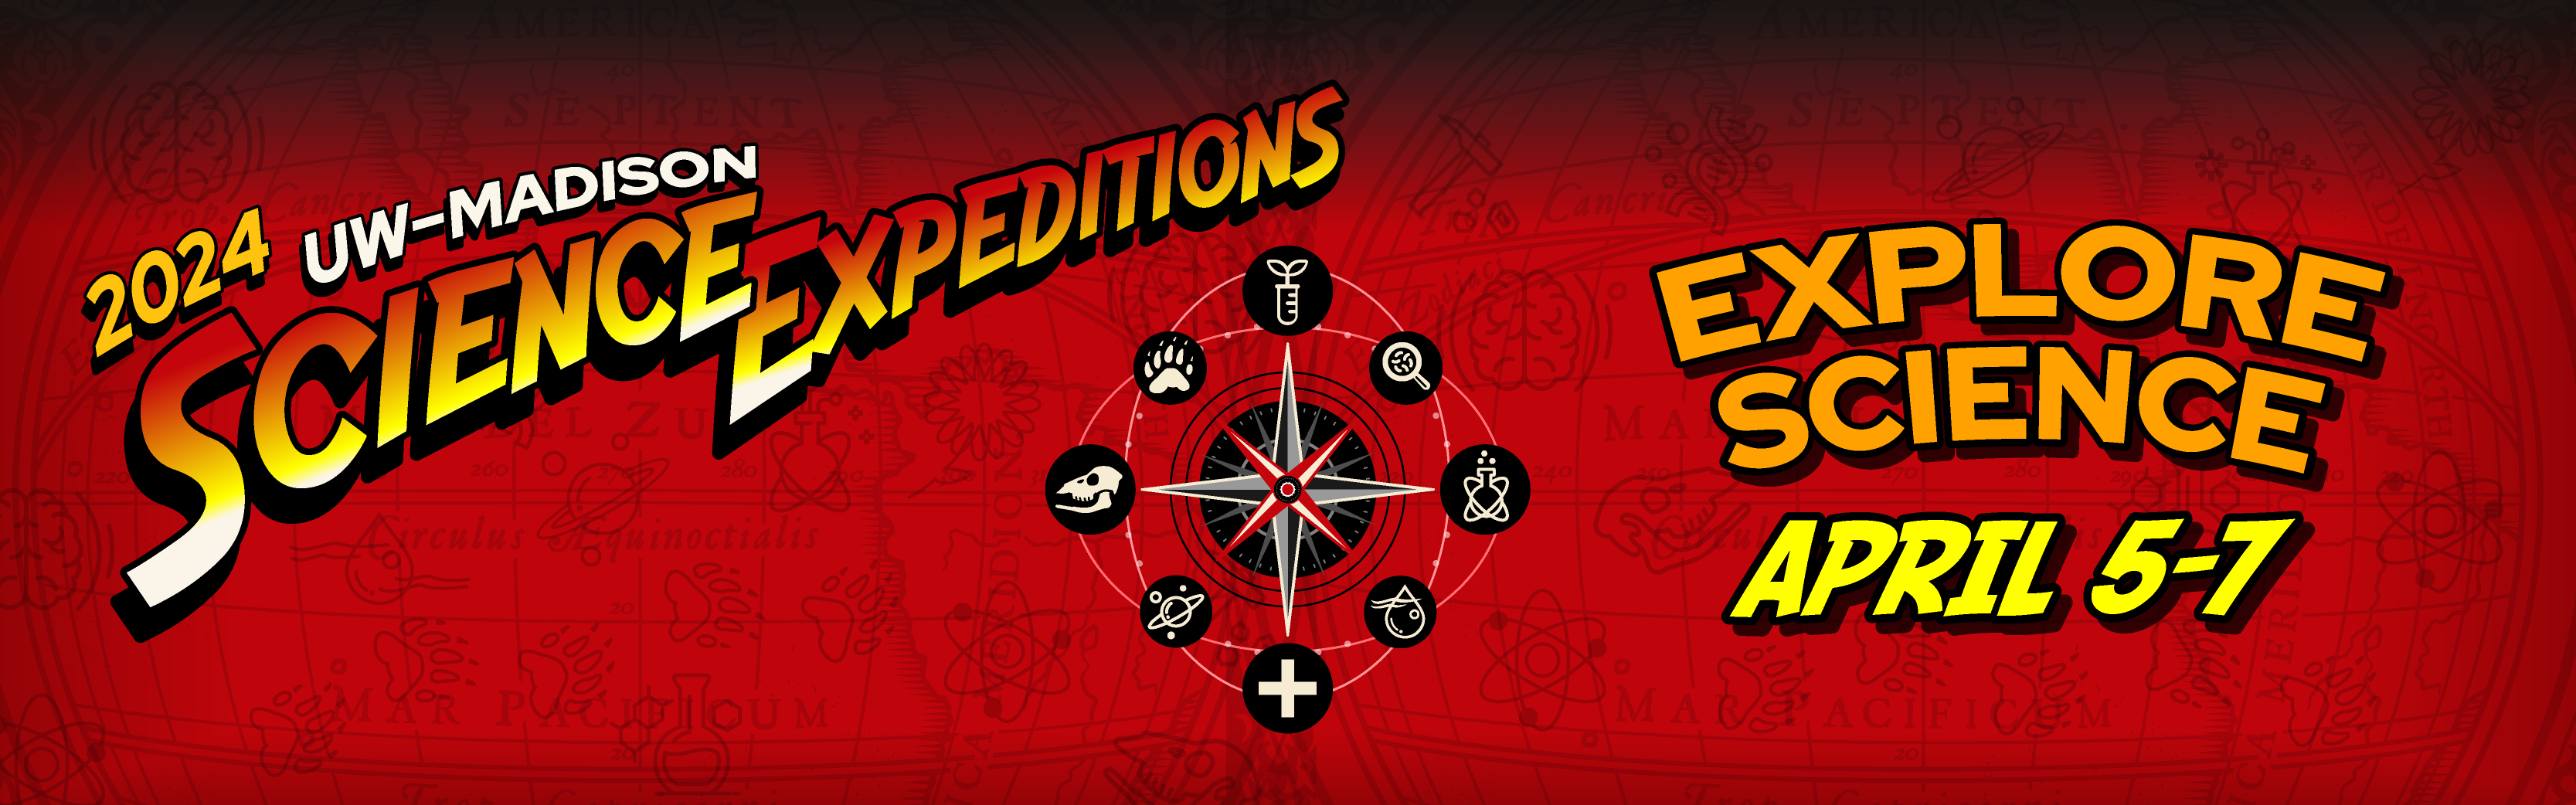 Red banner with the words Science Expeditions in an adventuresome font with a compass in the middle. The compass has science-themed images around it instead of the traditional "N" "S" markers.